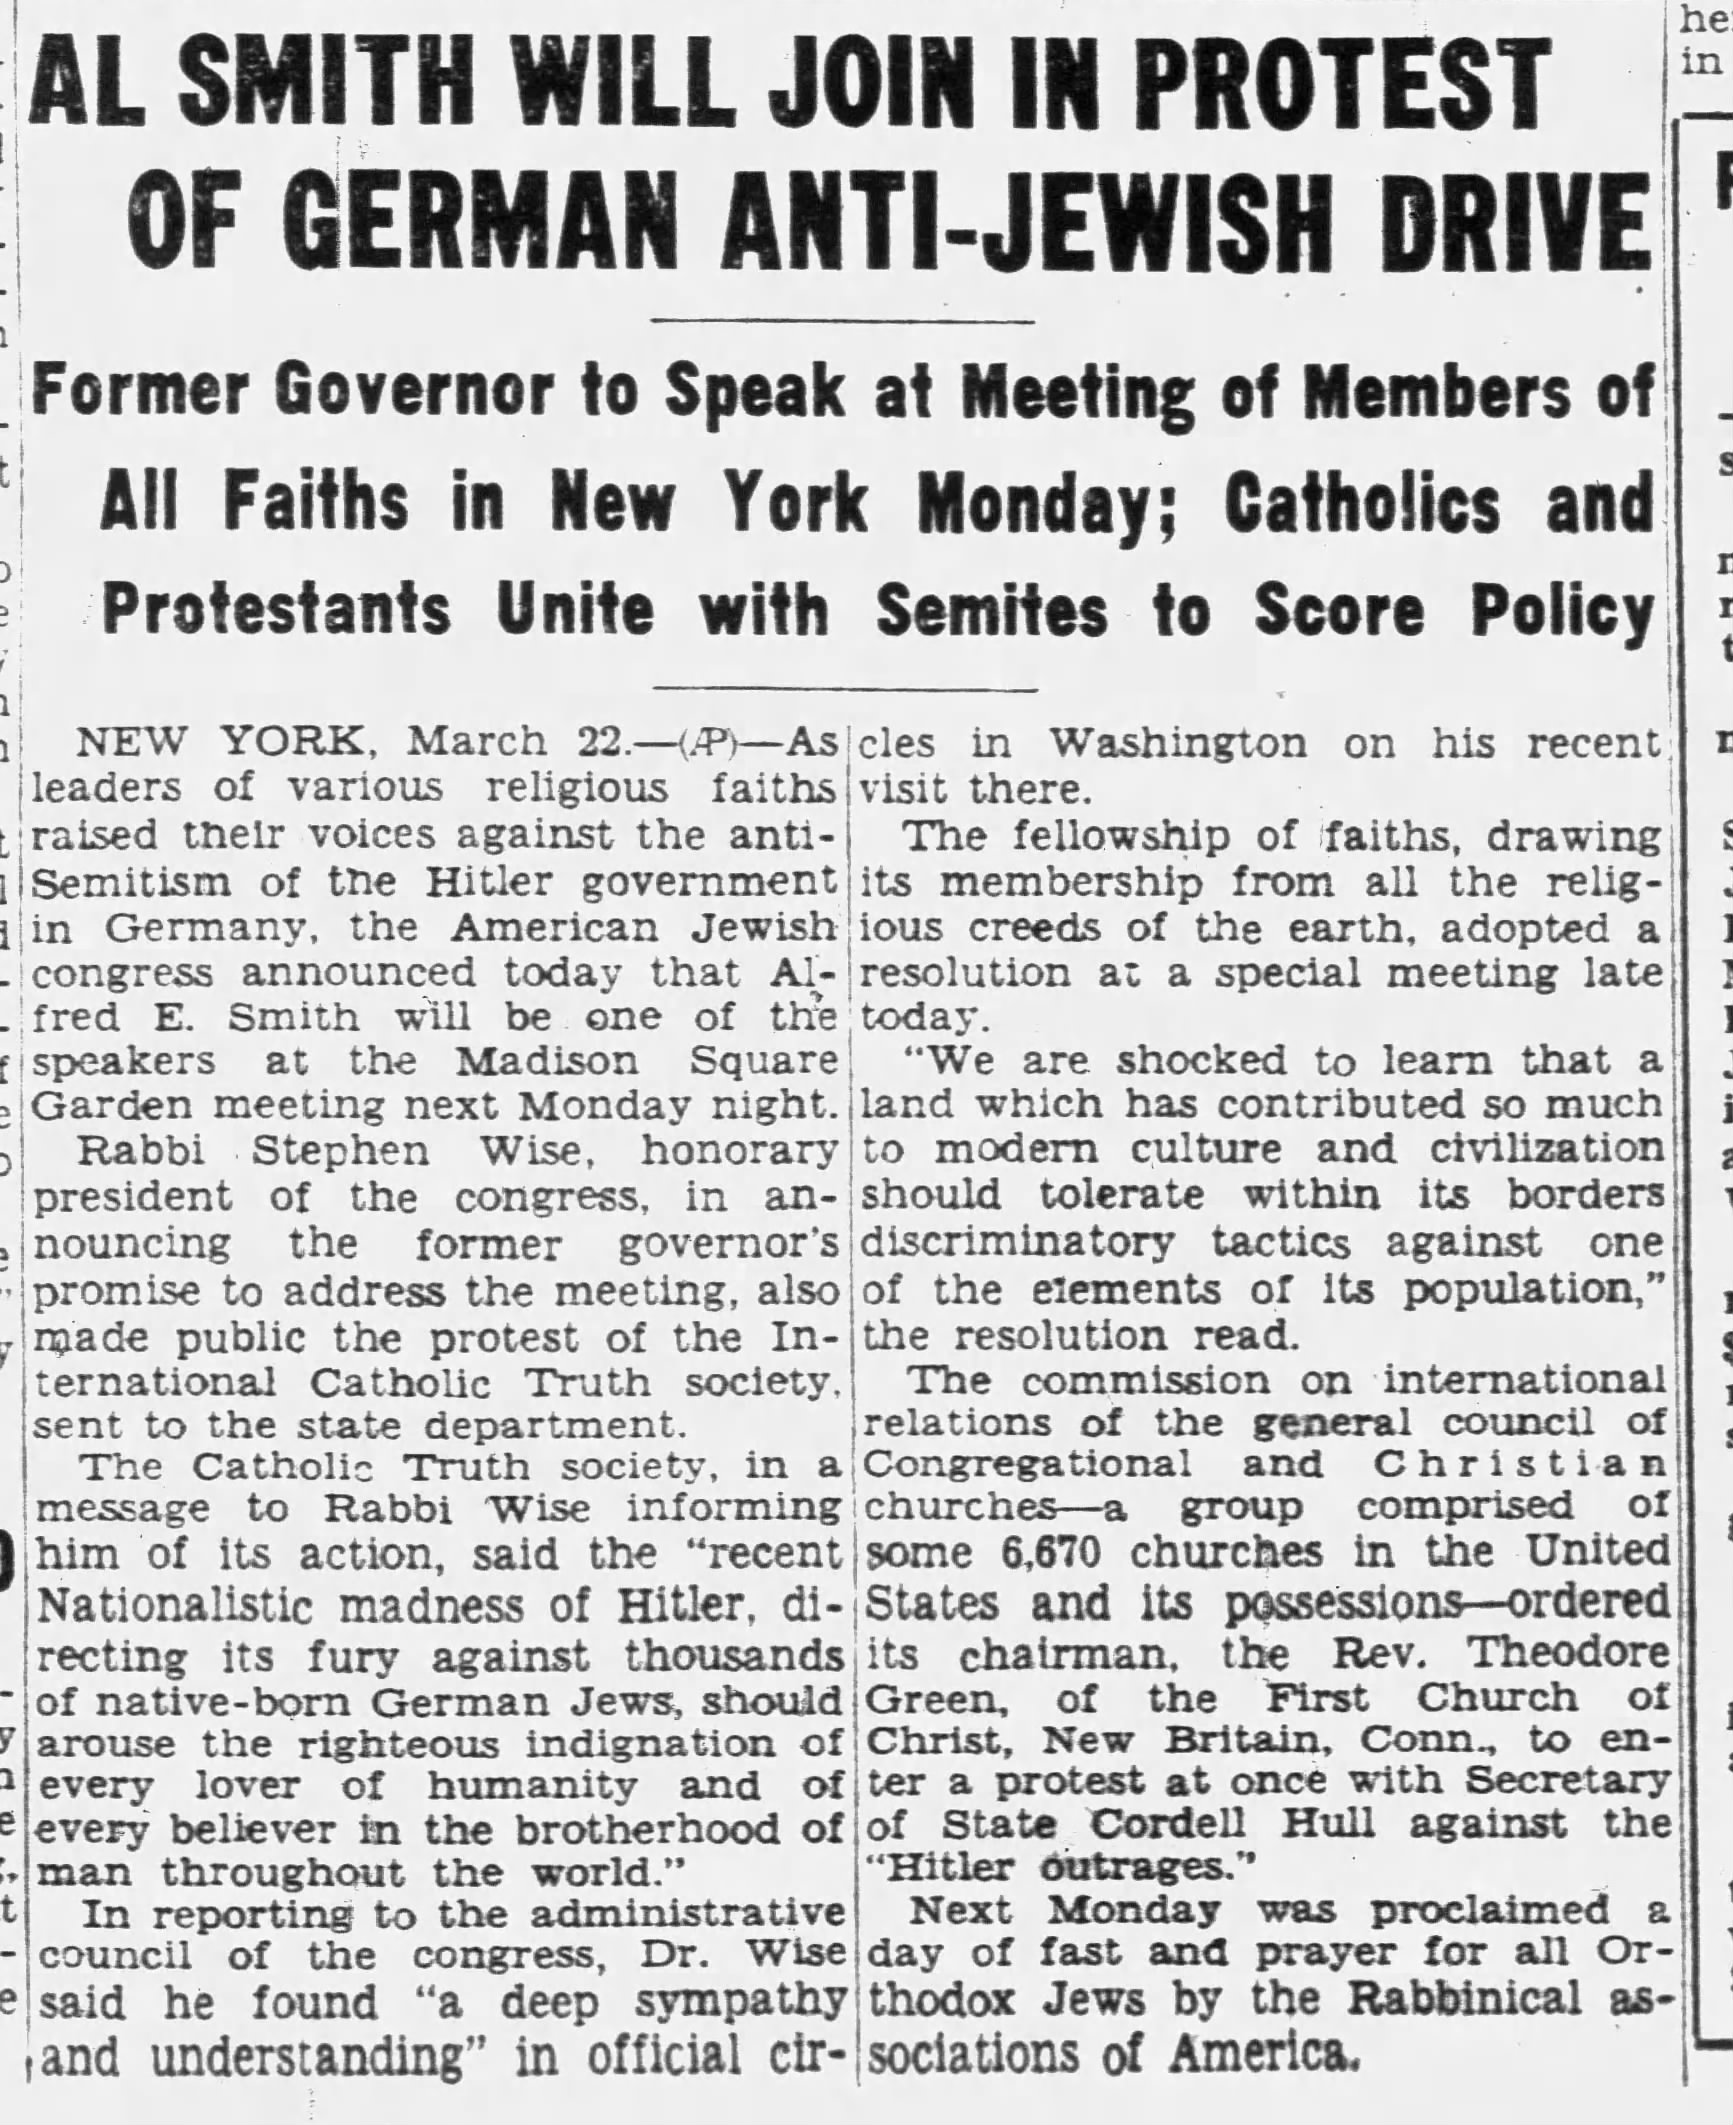 Al Smith Will Join In Protest Of German Anti-Jewish Drive